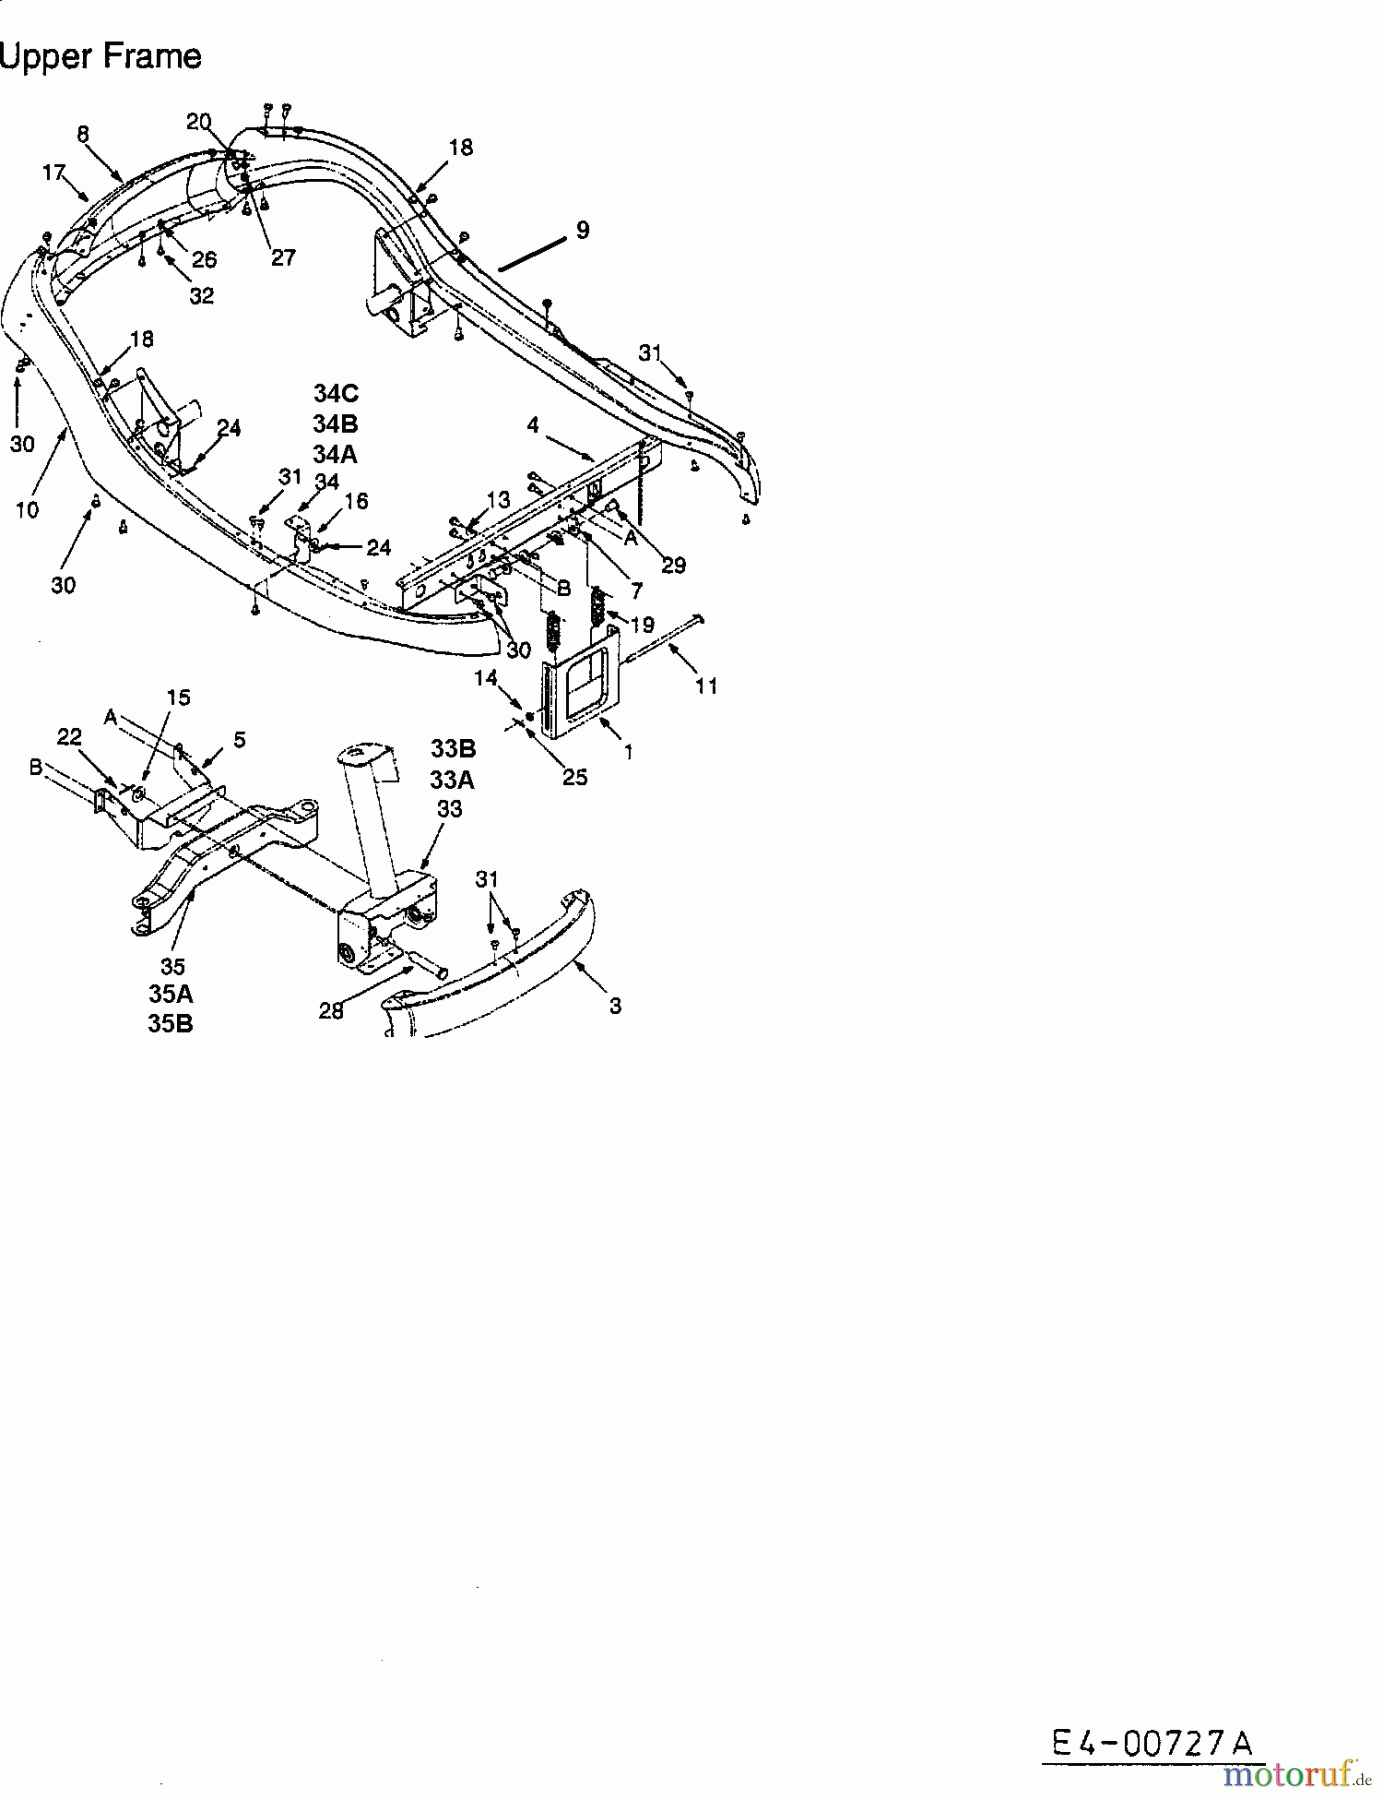  Lawnflite Lawn tractors 503 13A-312-611  (2002) Frame